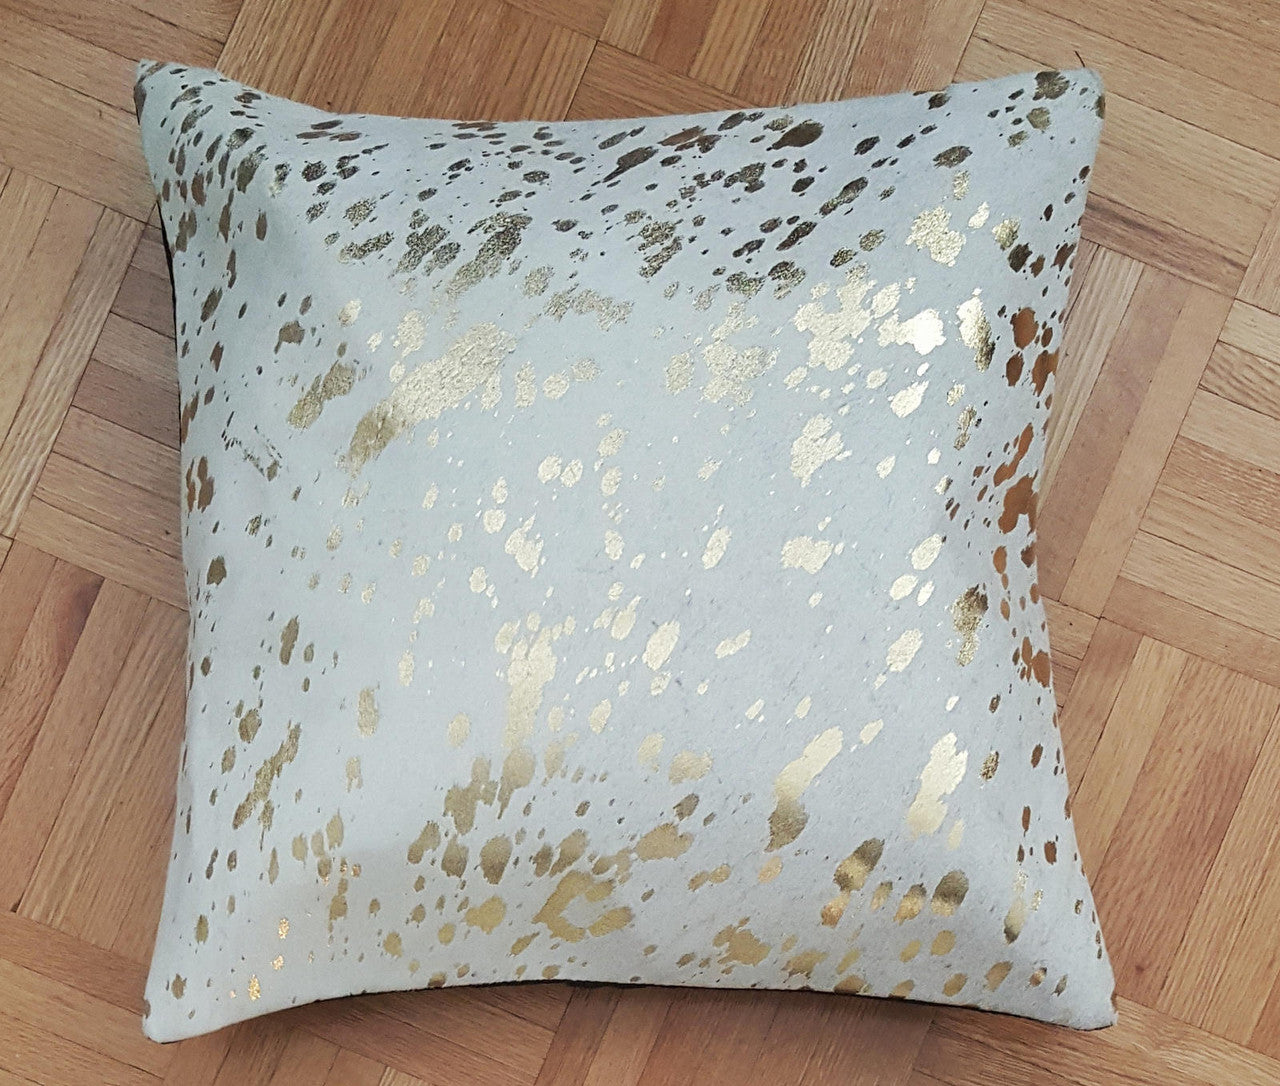 These metallic cowhide pillows are wonderful! add them to your husband’s office chairs and we love them.

